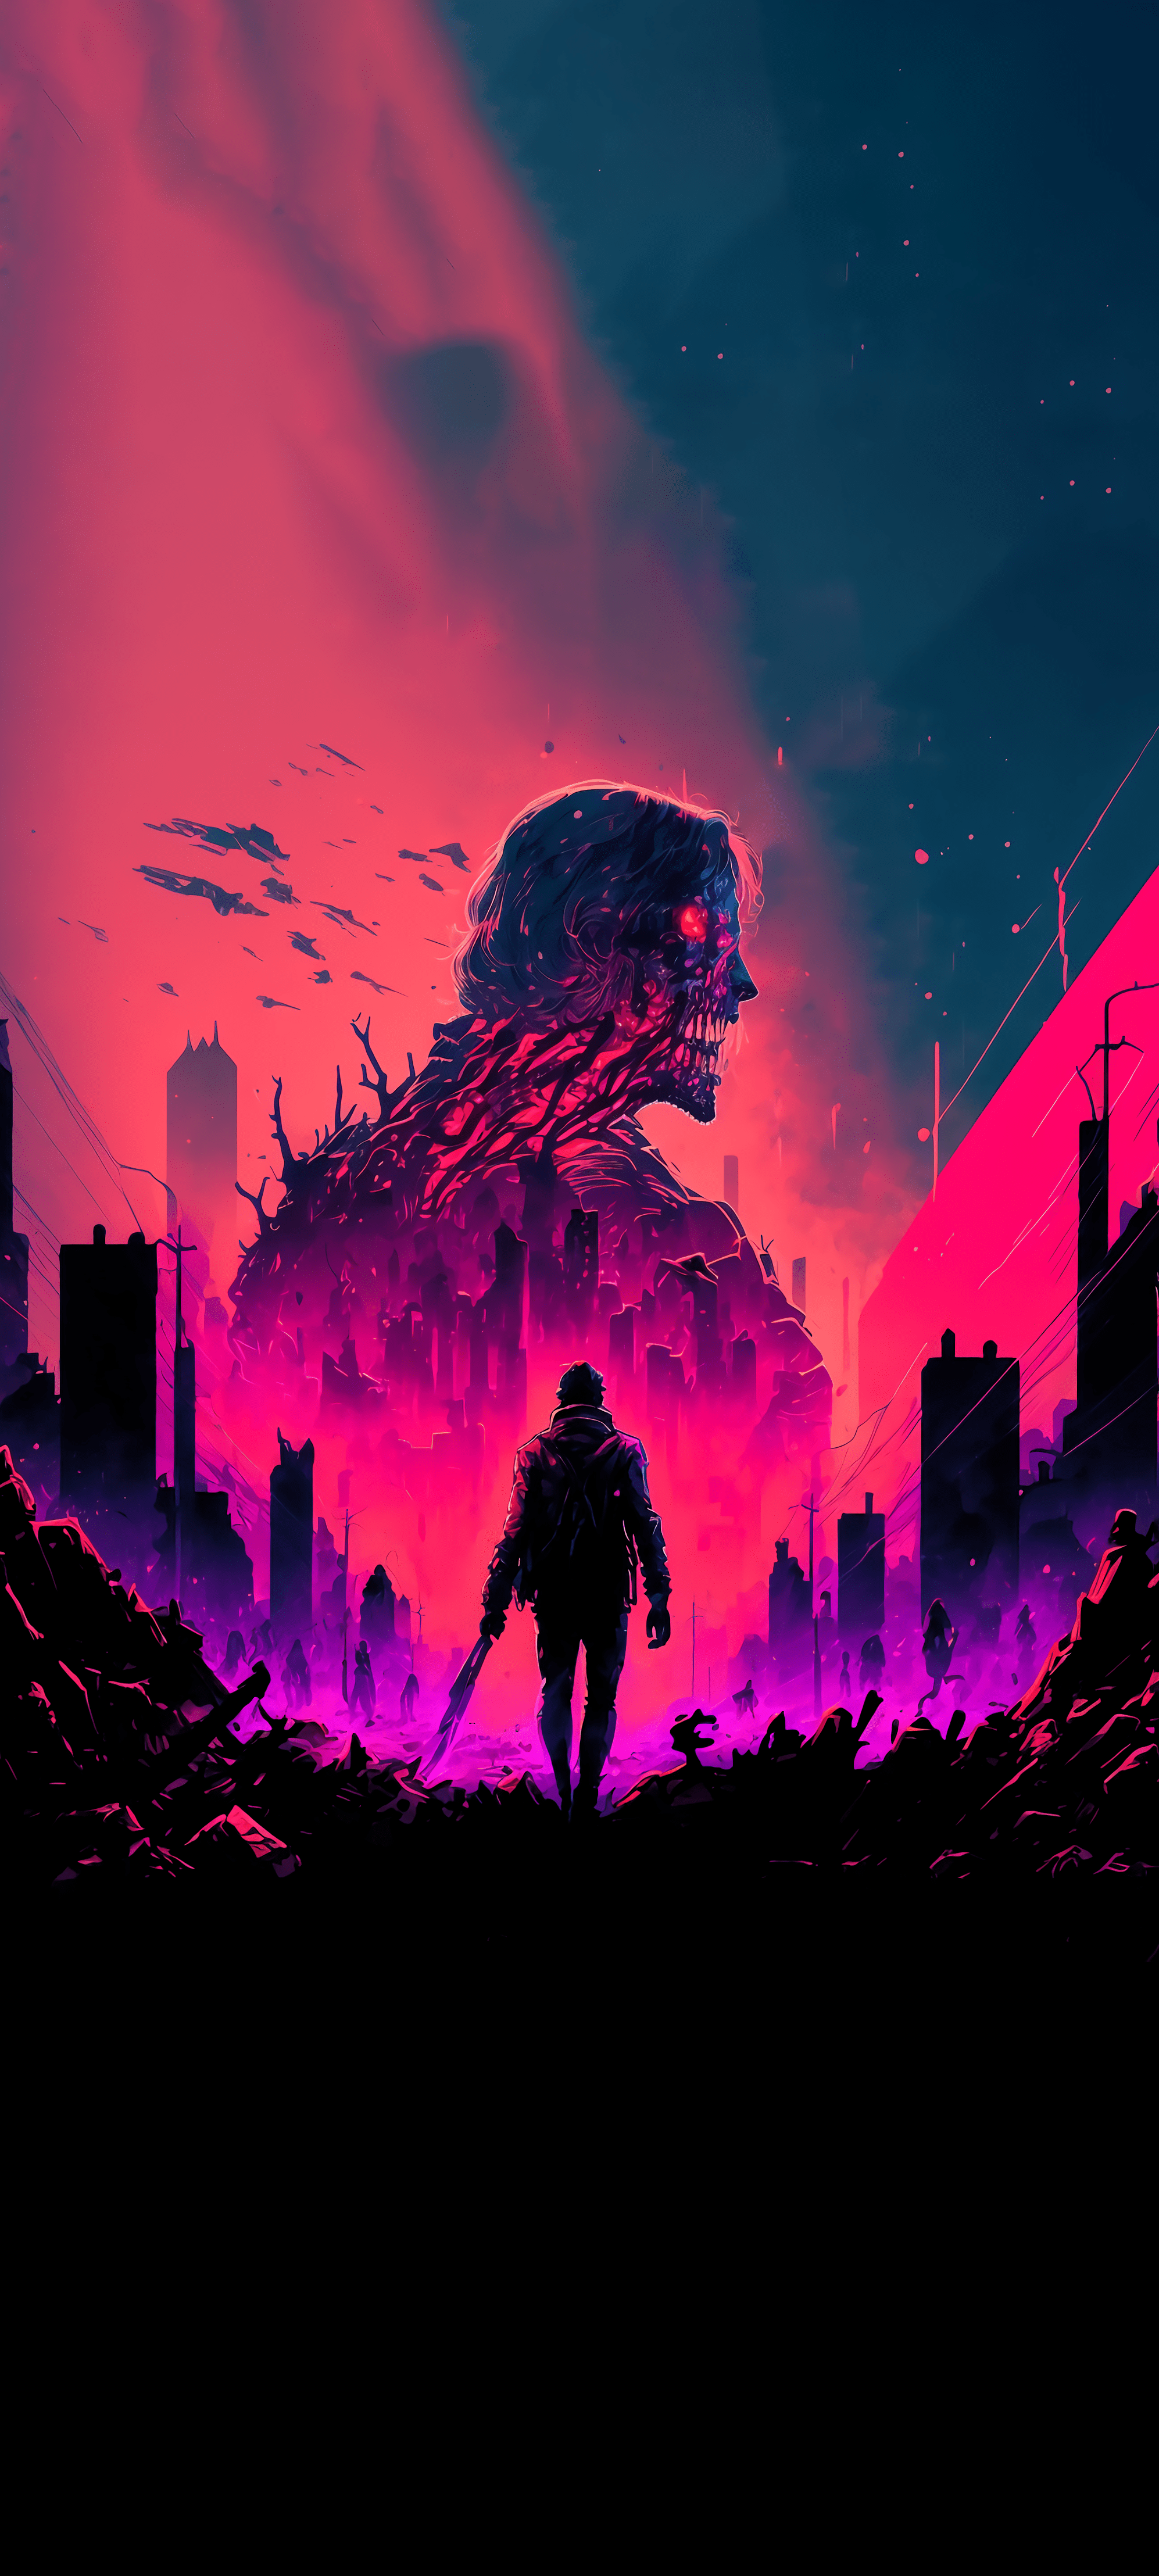 A man standing in front of an image - Synthwave